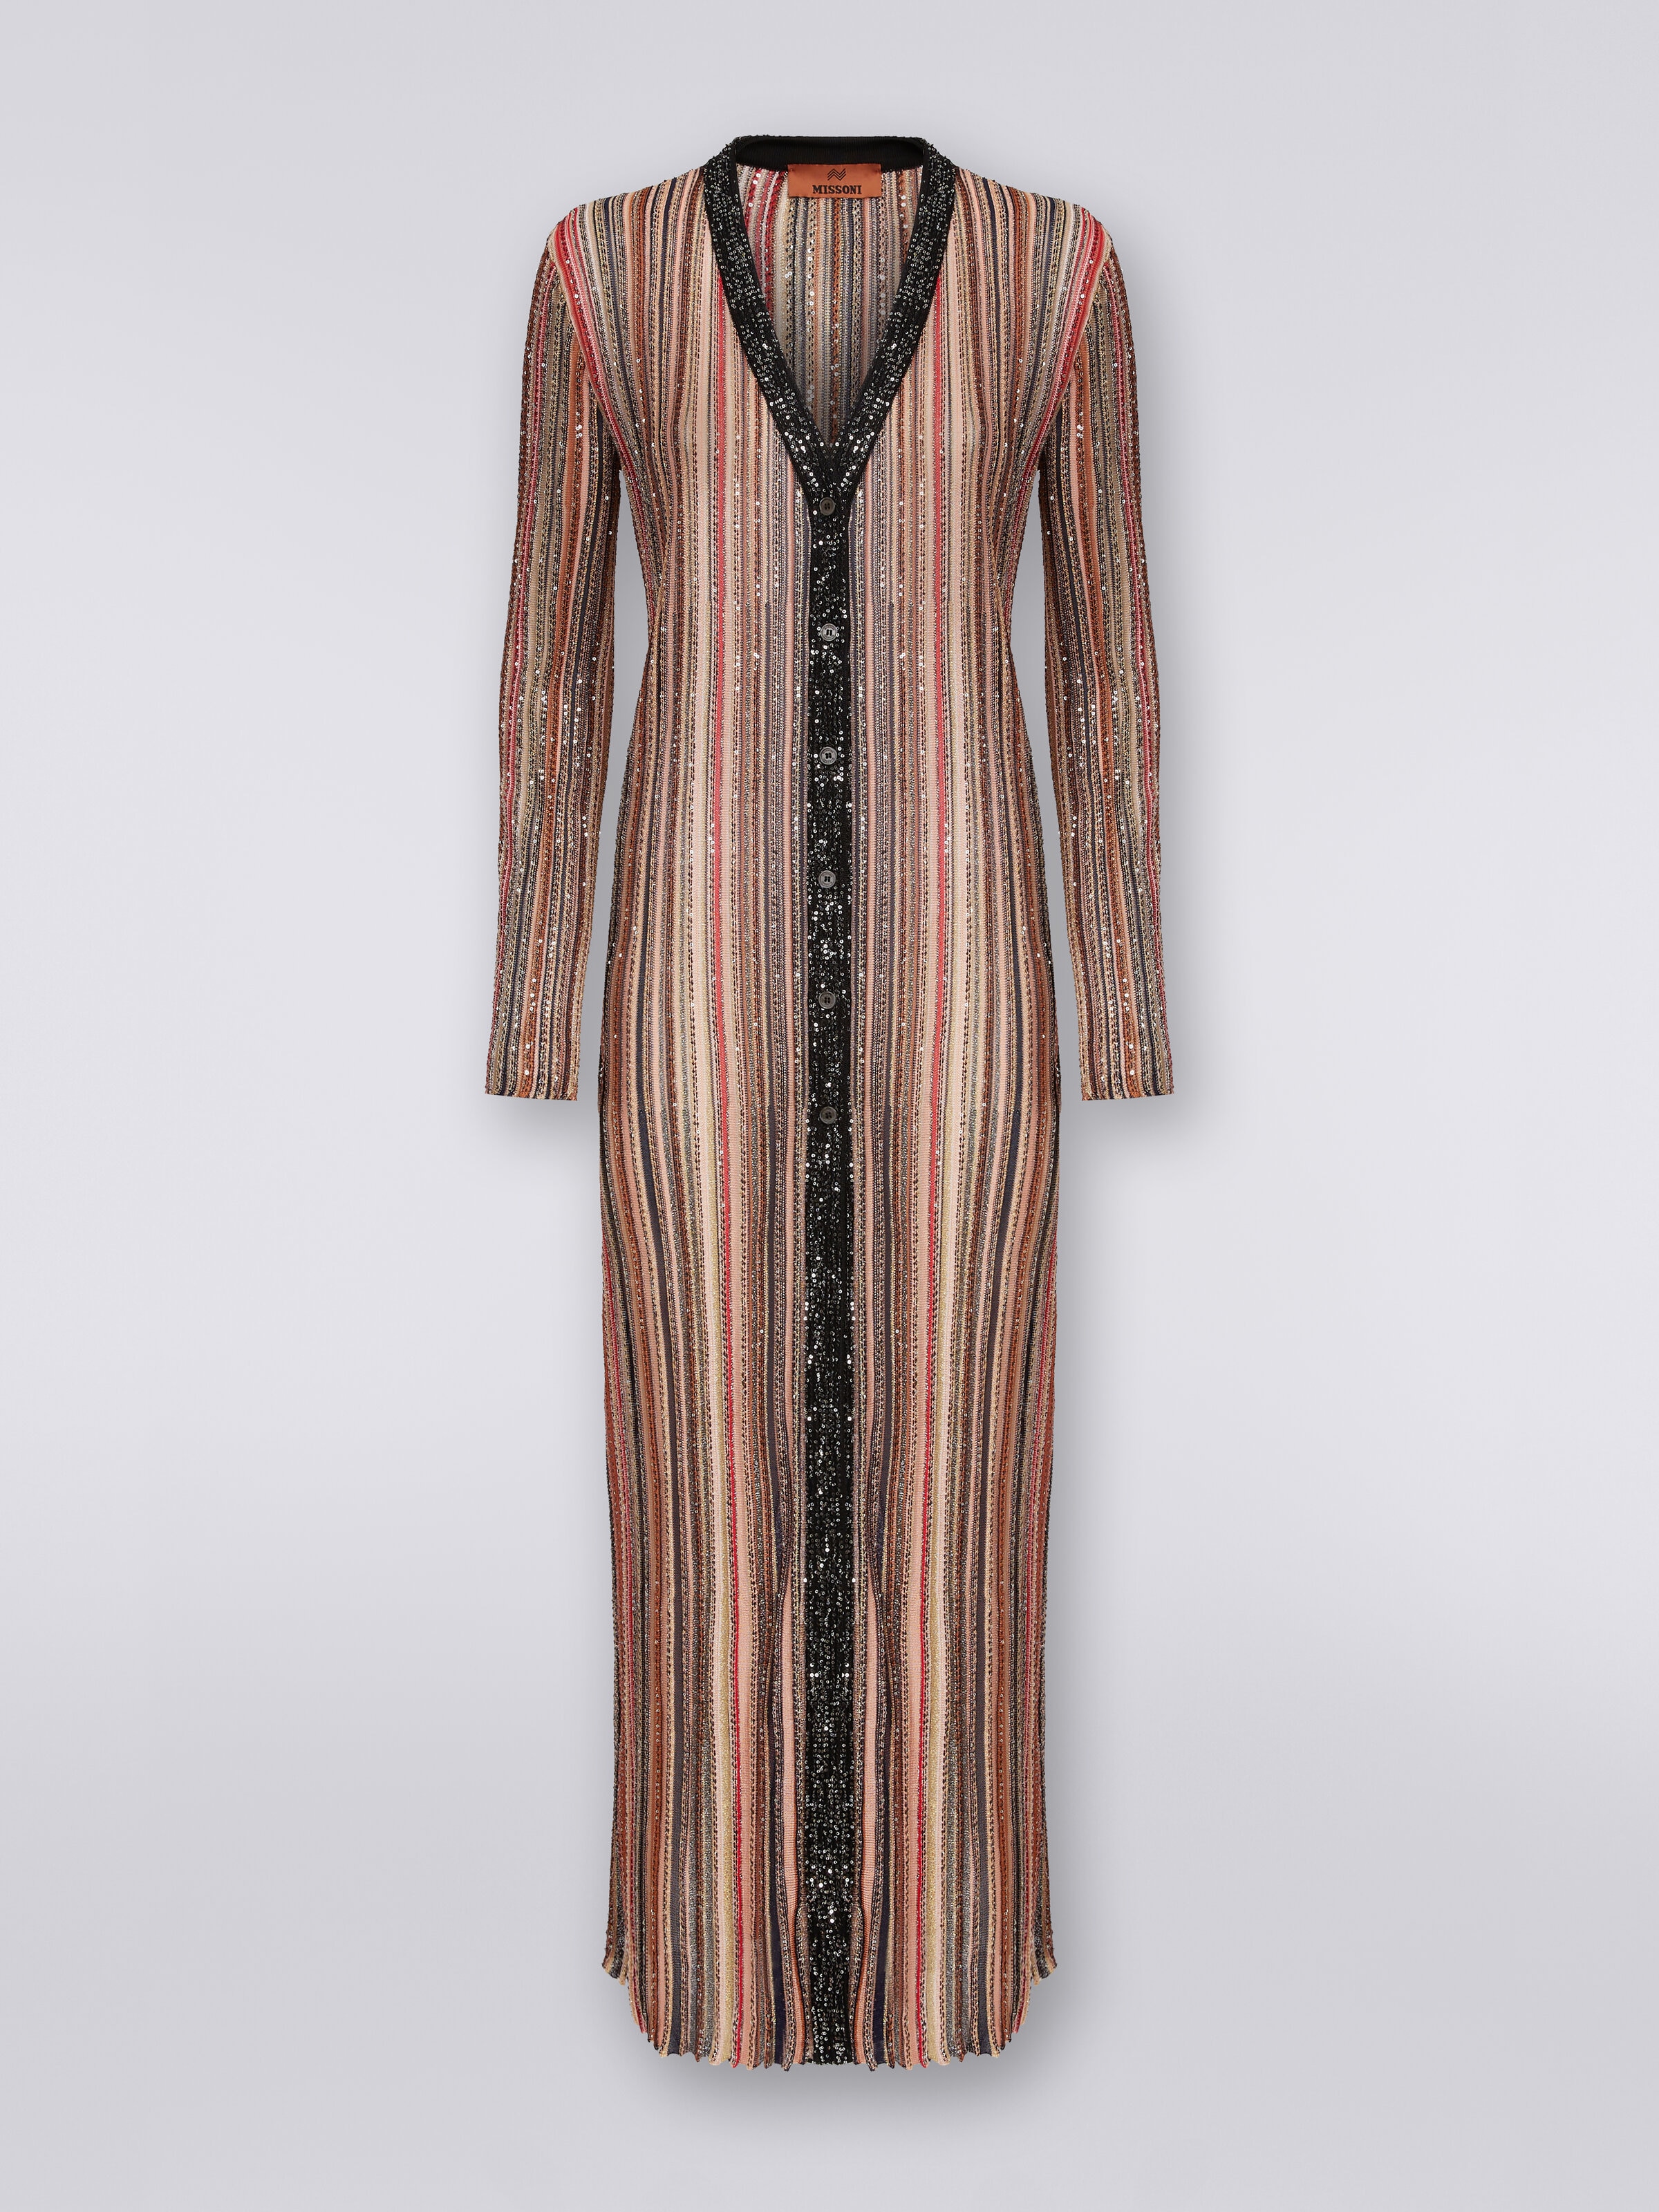 Long cardigan in vertical striped knit with sequins, Multicoloured  - 0